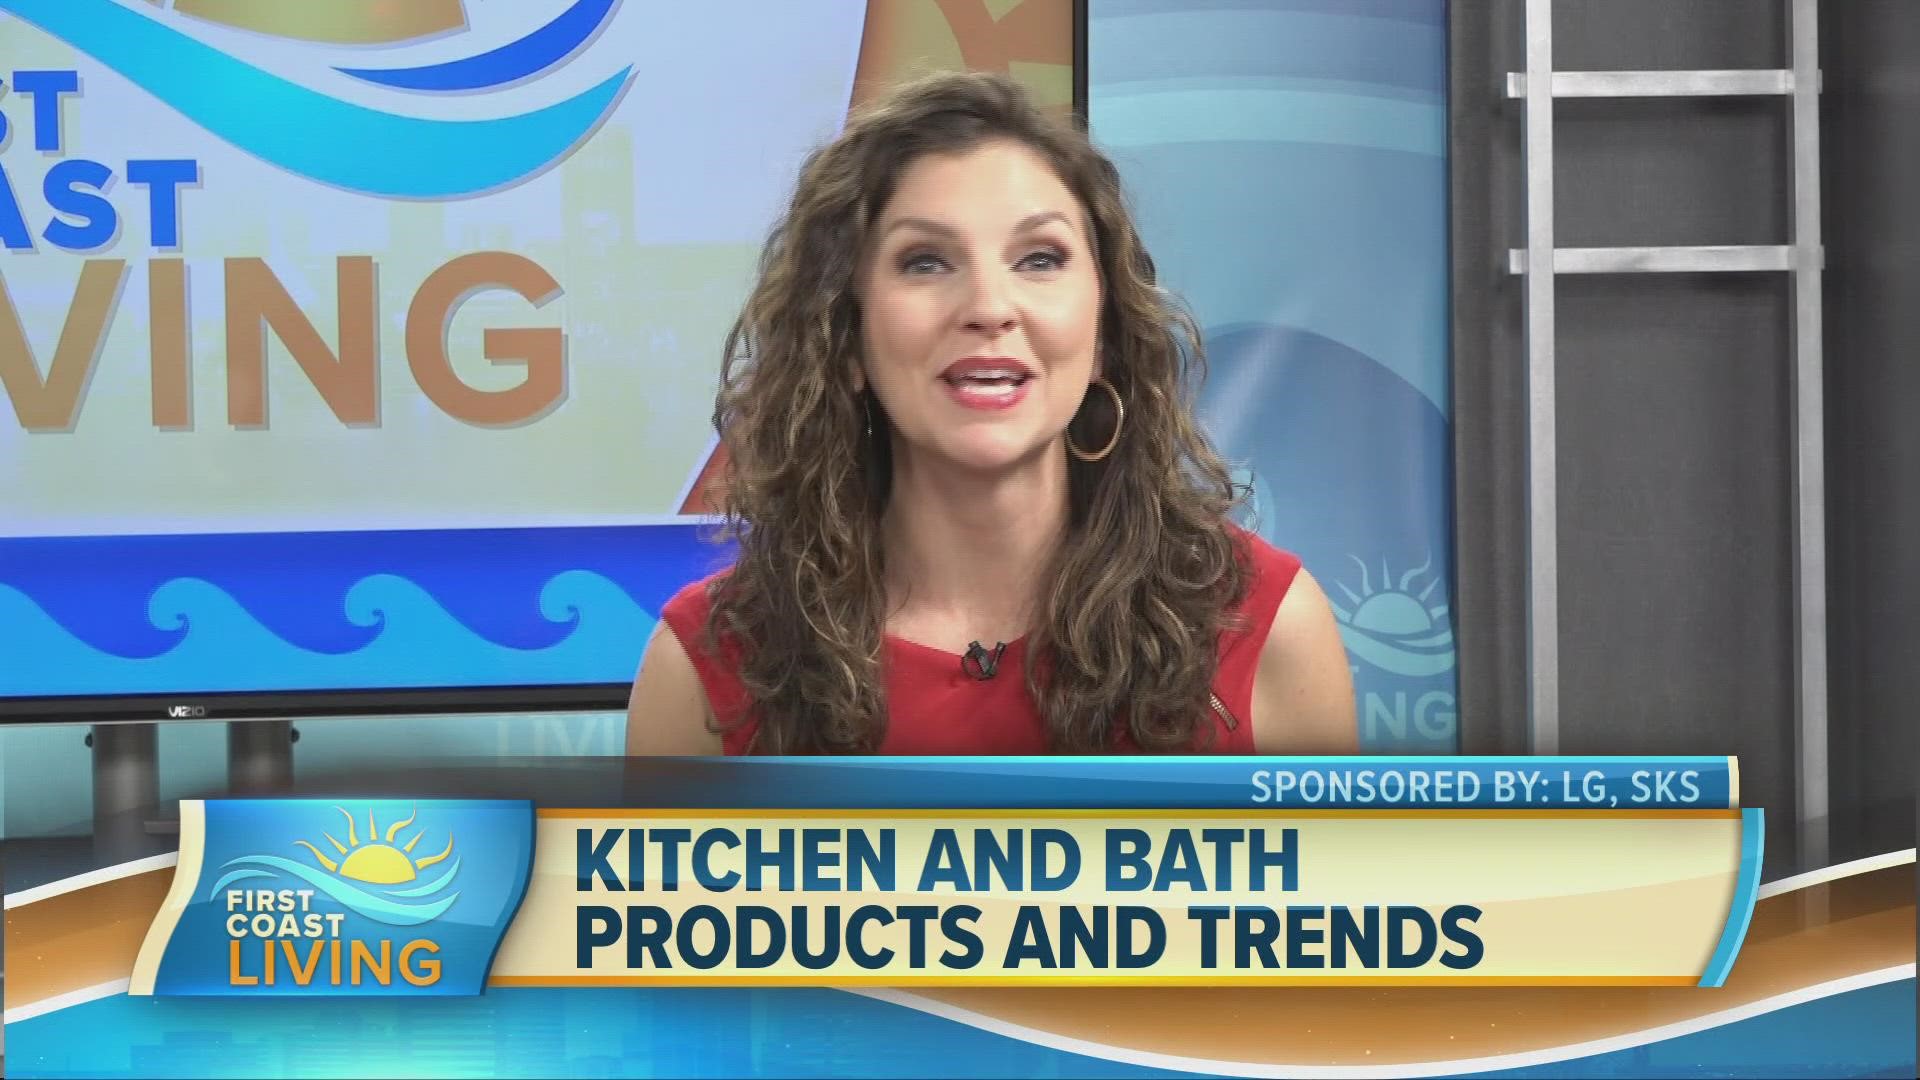 Lifestyle editor, Joann Butler shares the latest and greatest kitchen and bath products, trends and technologies of 2023.